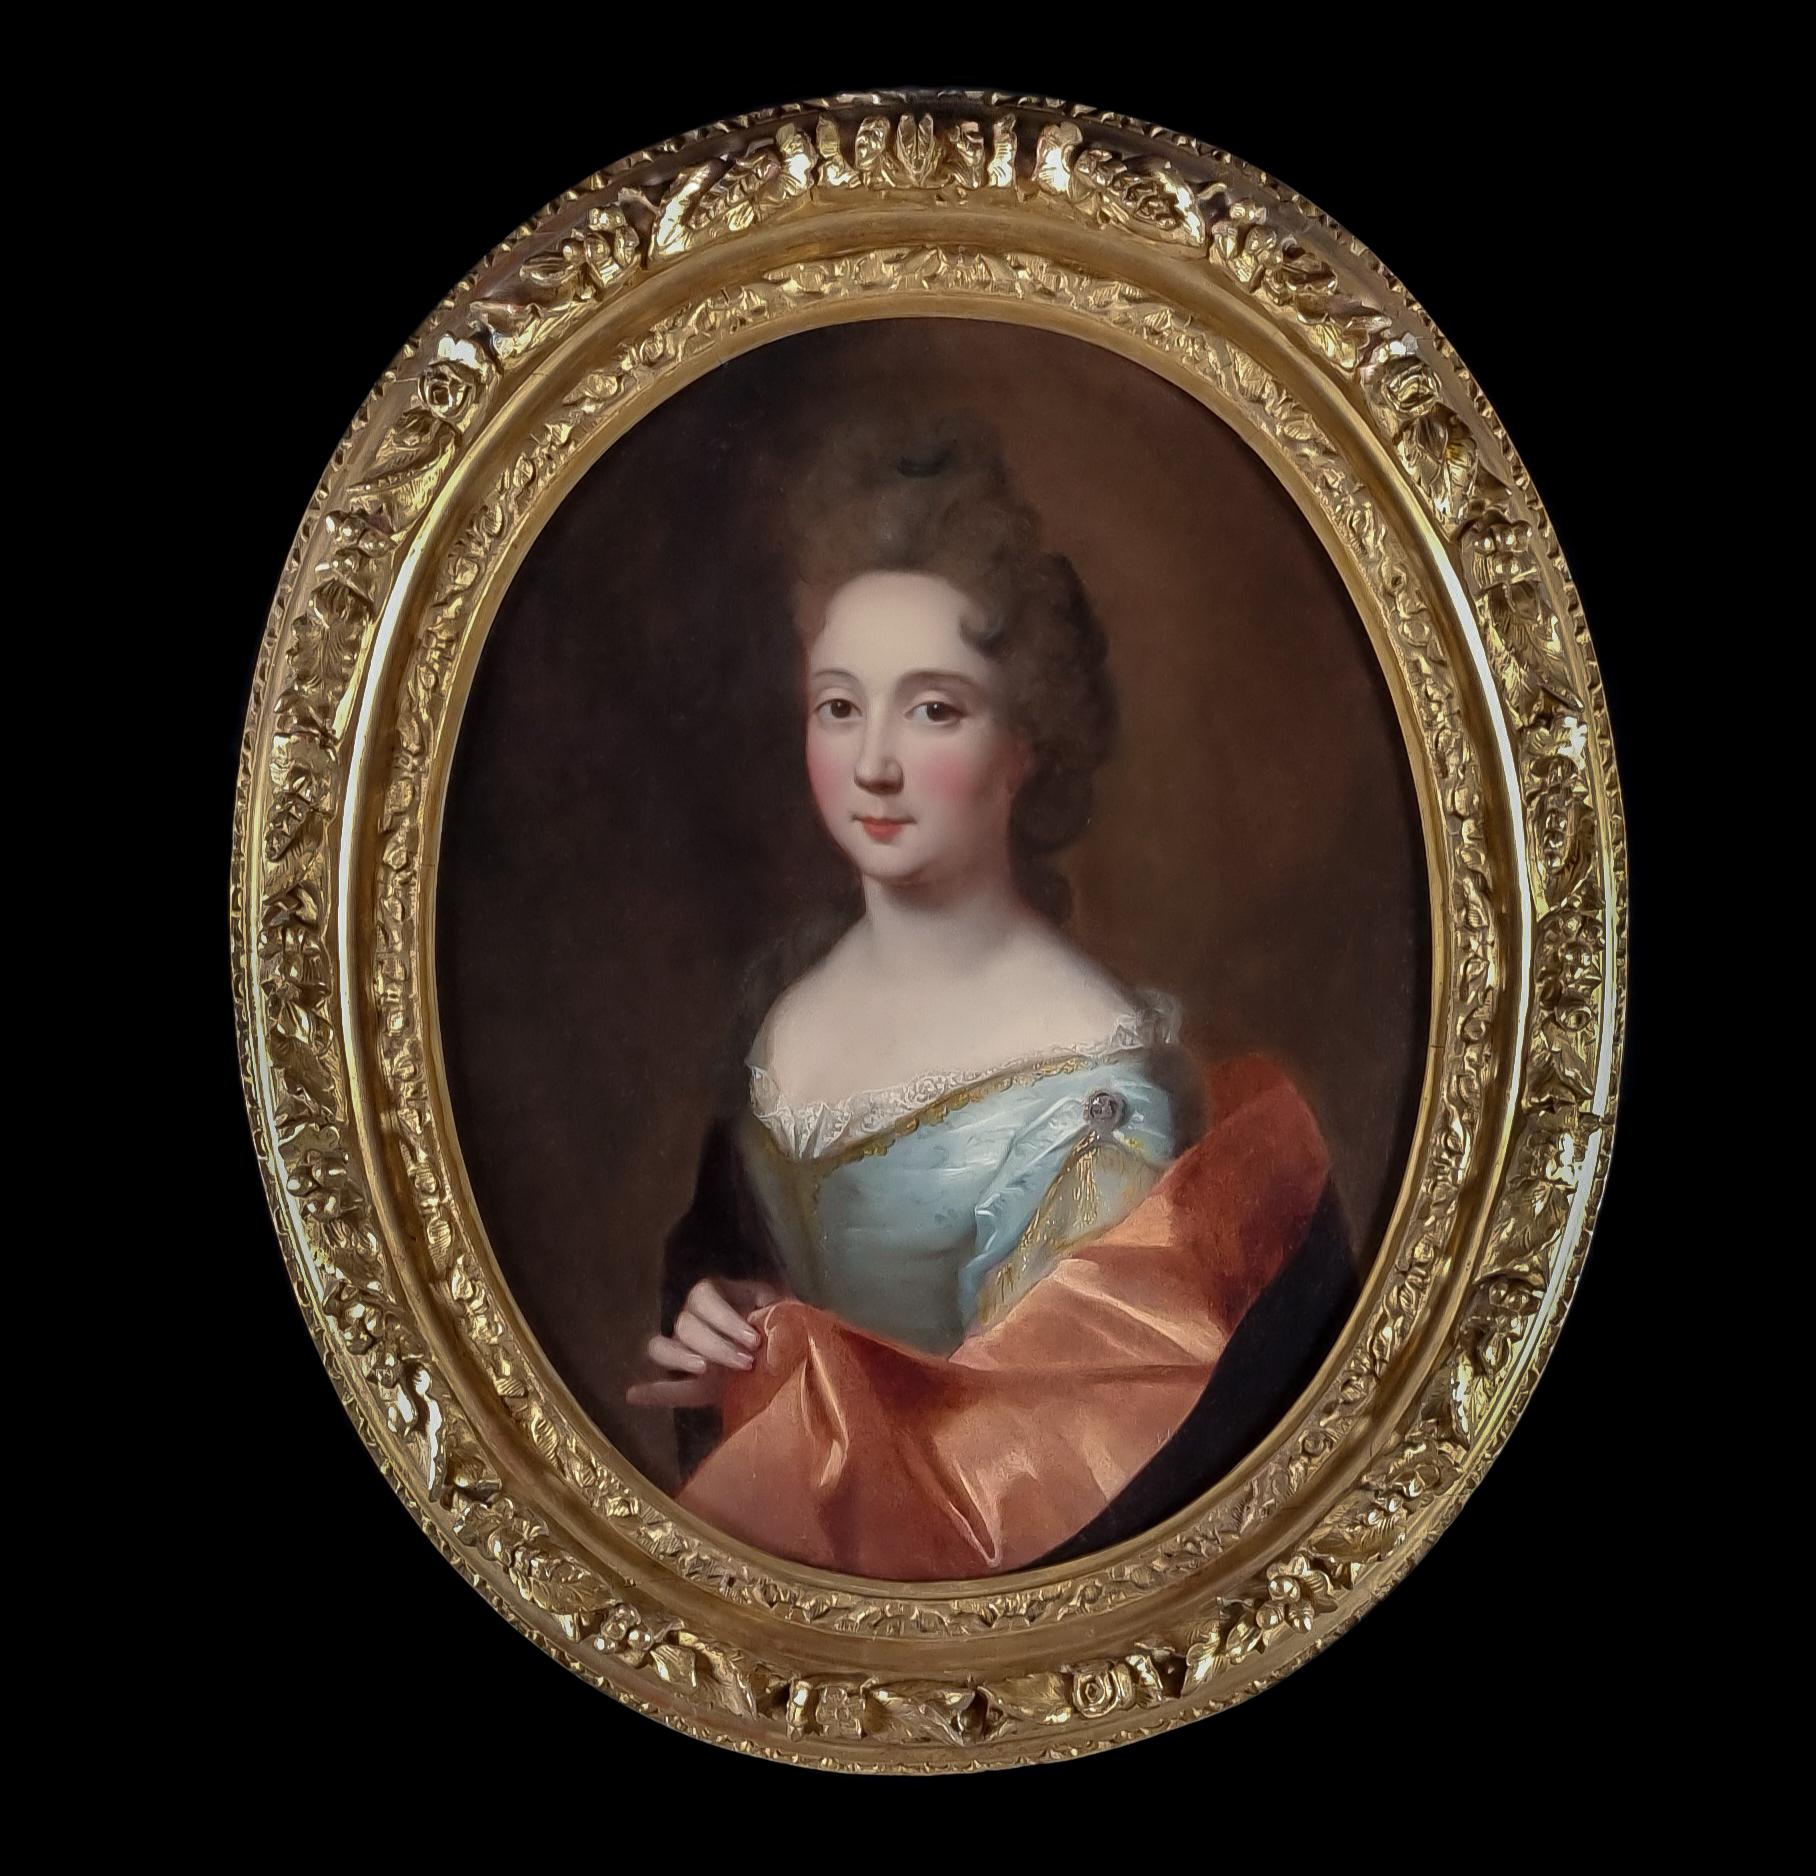 Portrait of a Lady in Silver Dress Oil Painting, Outstanding Gilded Carved Frame - Art by (Circle of) François Jouvenet